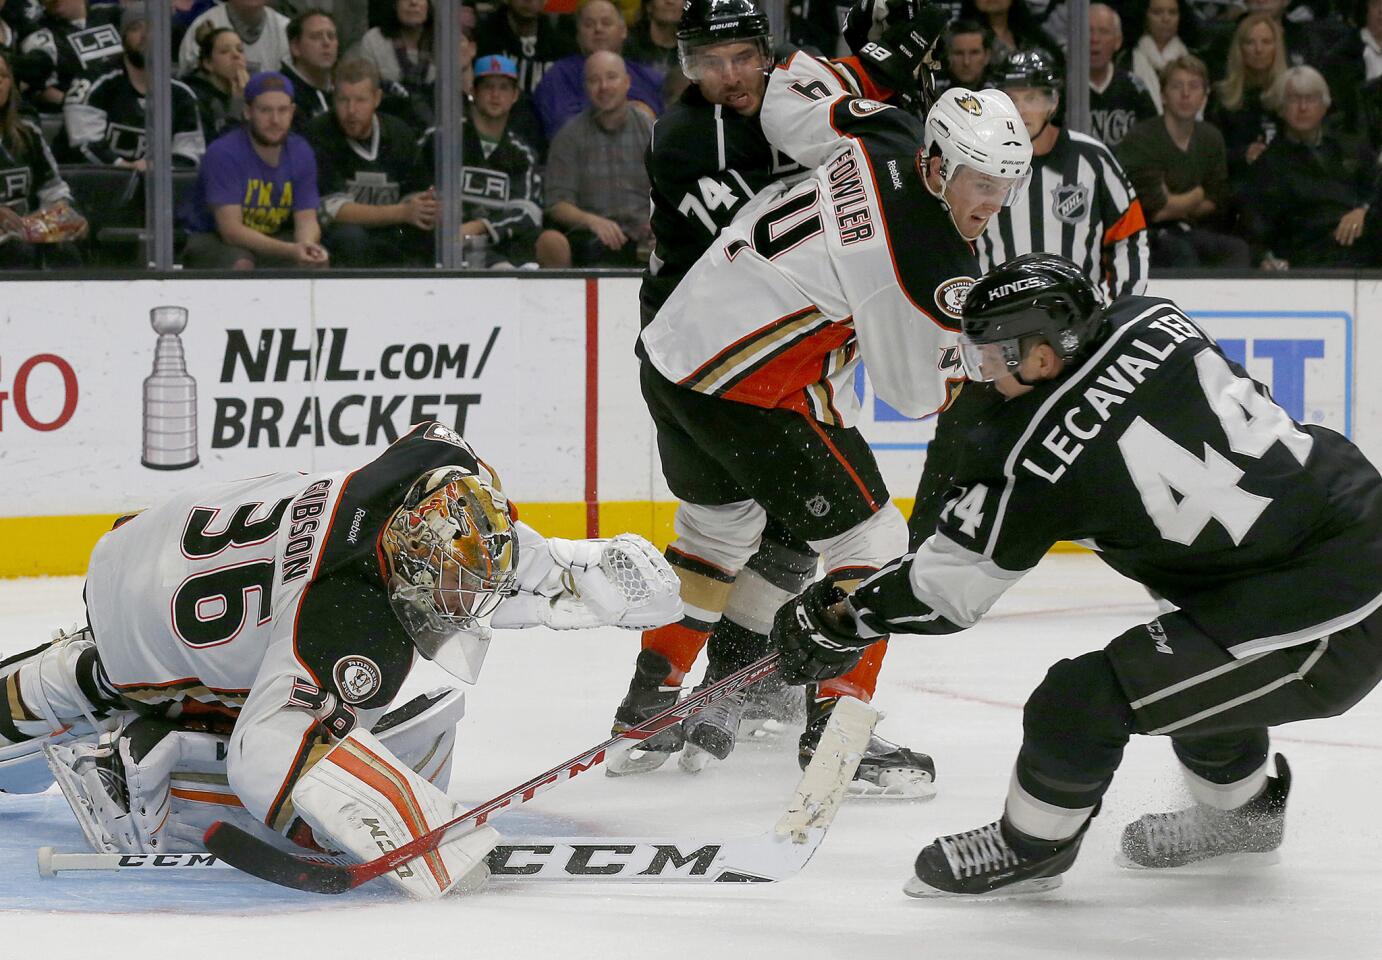 Ducks goalie John Gibson makes a save against Kings center Vincent Lecavalier during the third period.